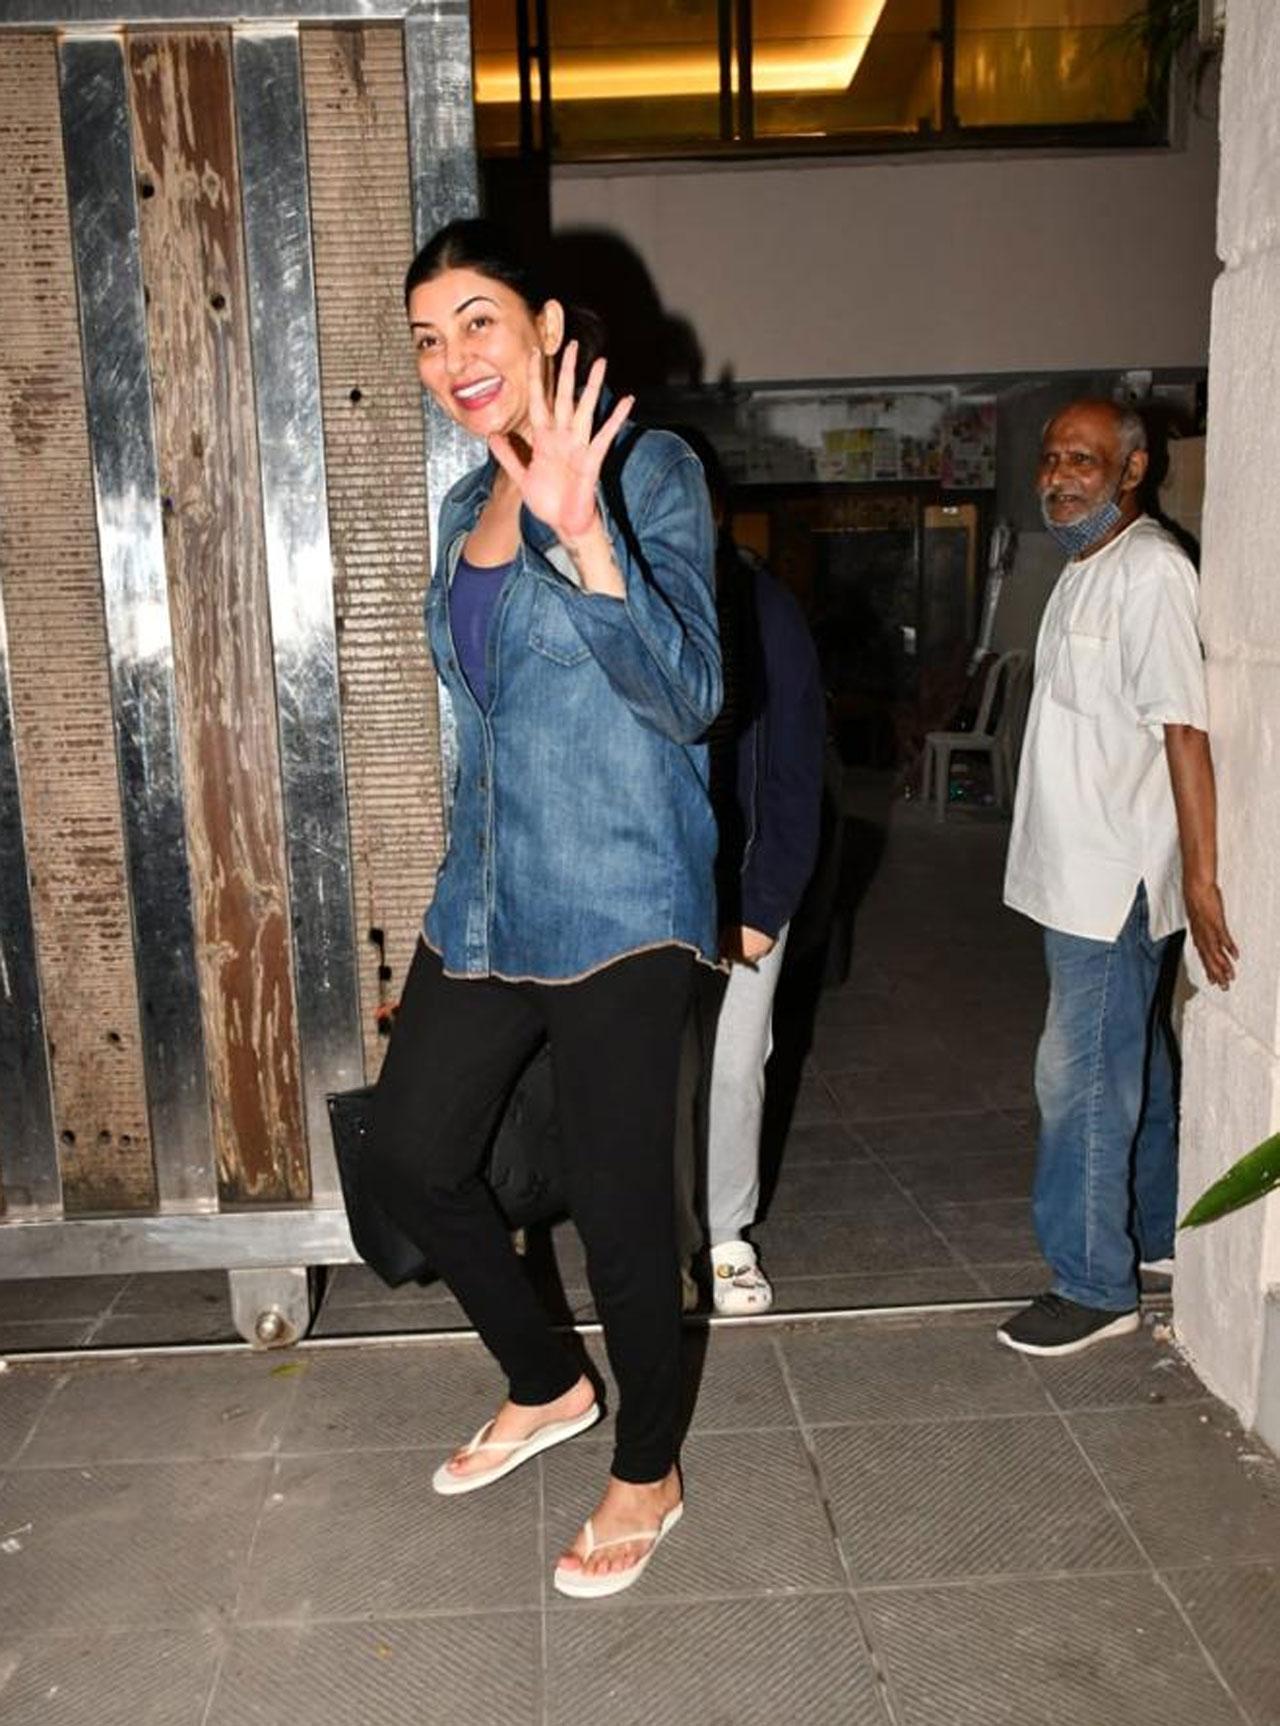 On December 23, Sushmita took to Instagram to announce her break-up with Rohman amid rumours that they had parted ways. Sharing a selfie also featuring Rohman, she had written, 